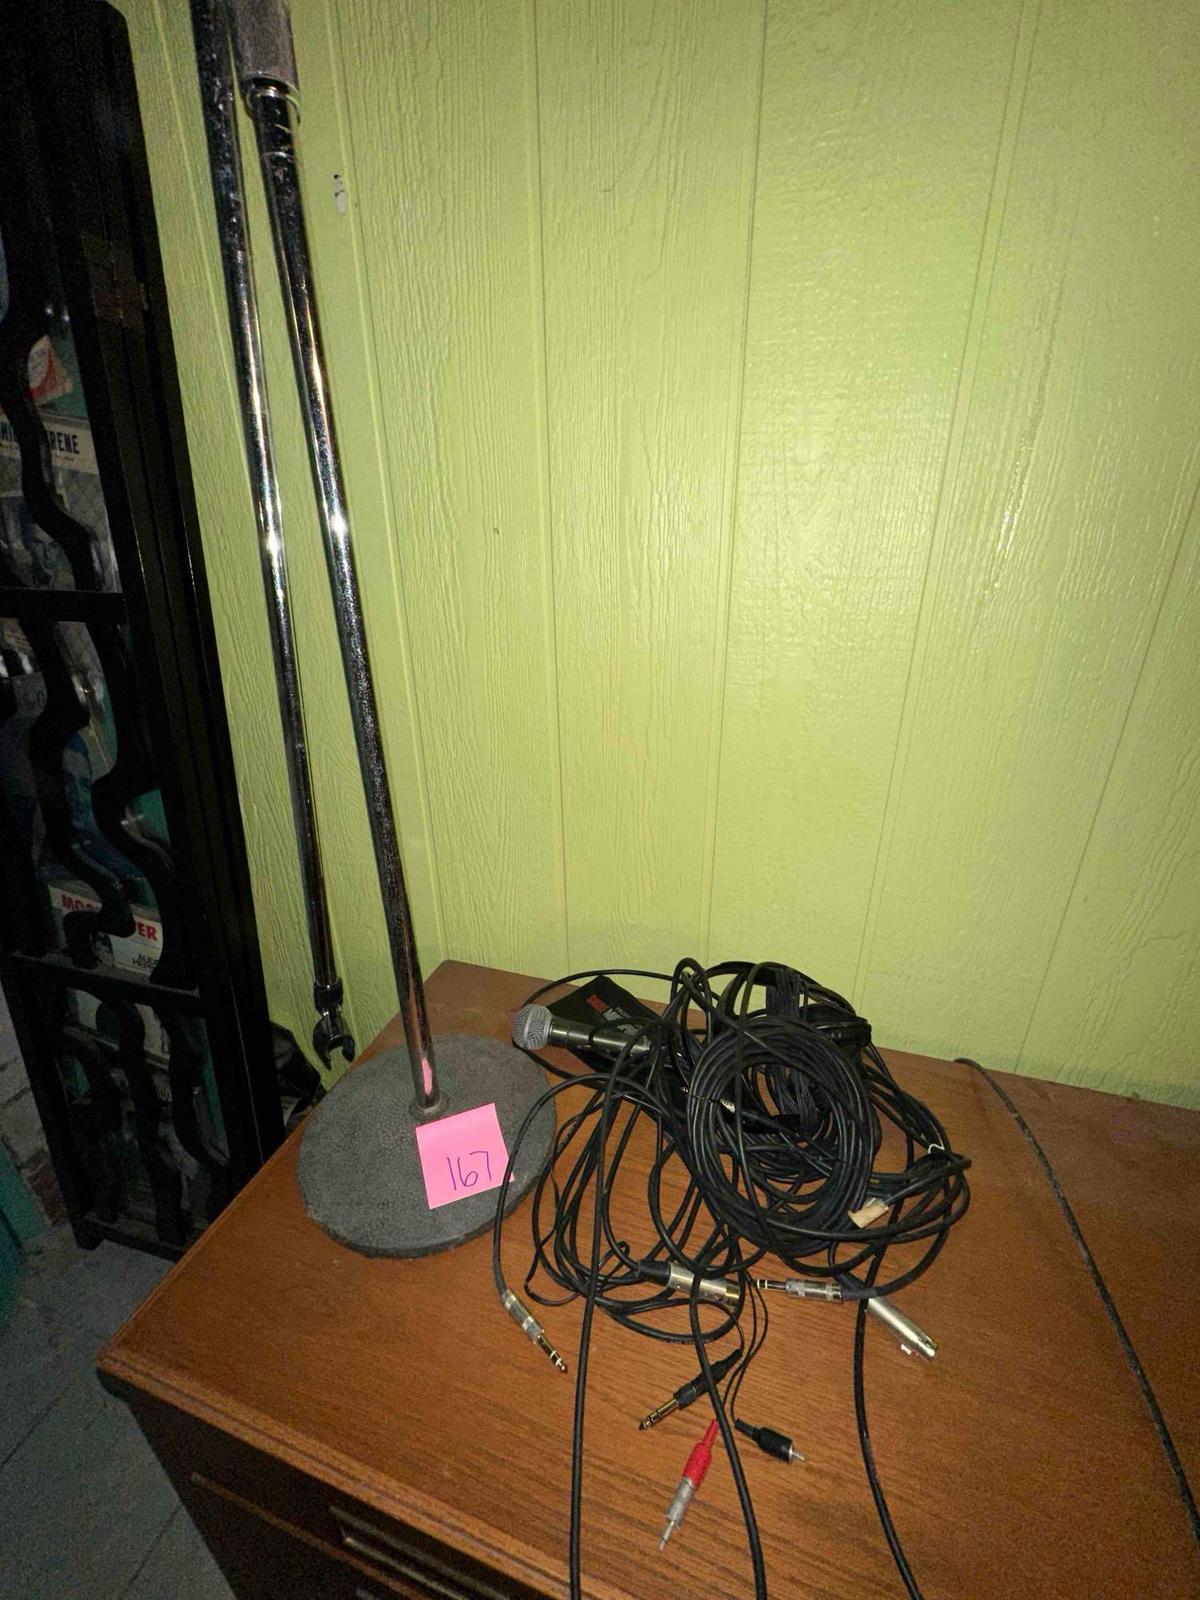 microphone with floor, stand cords, other electronics